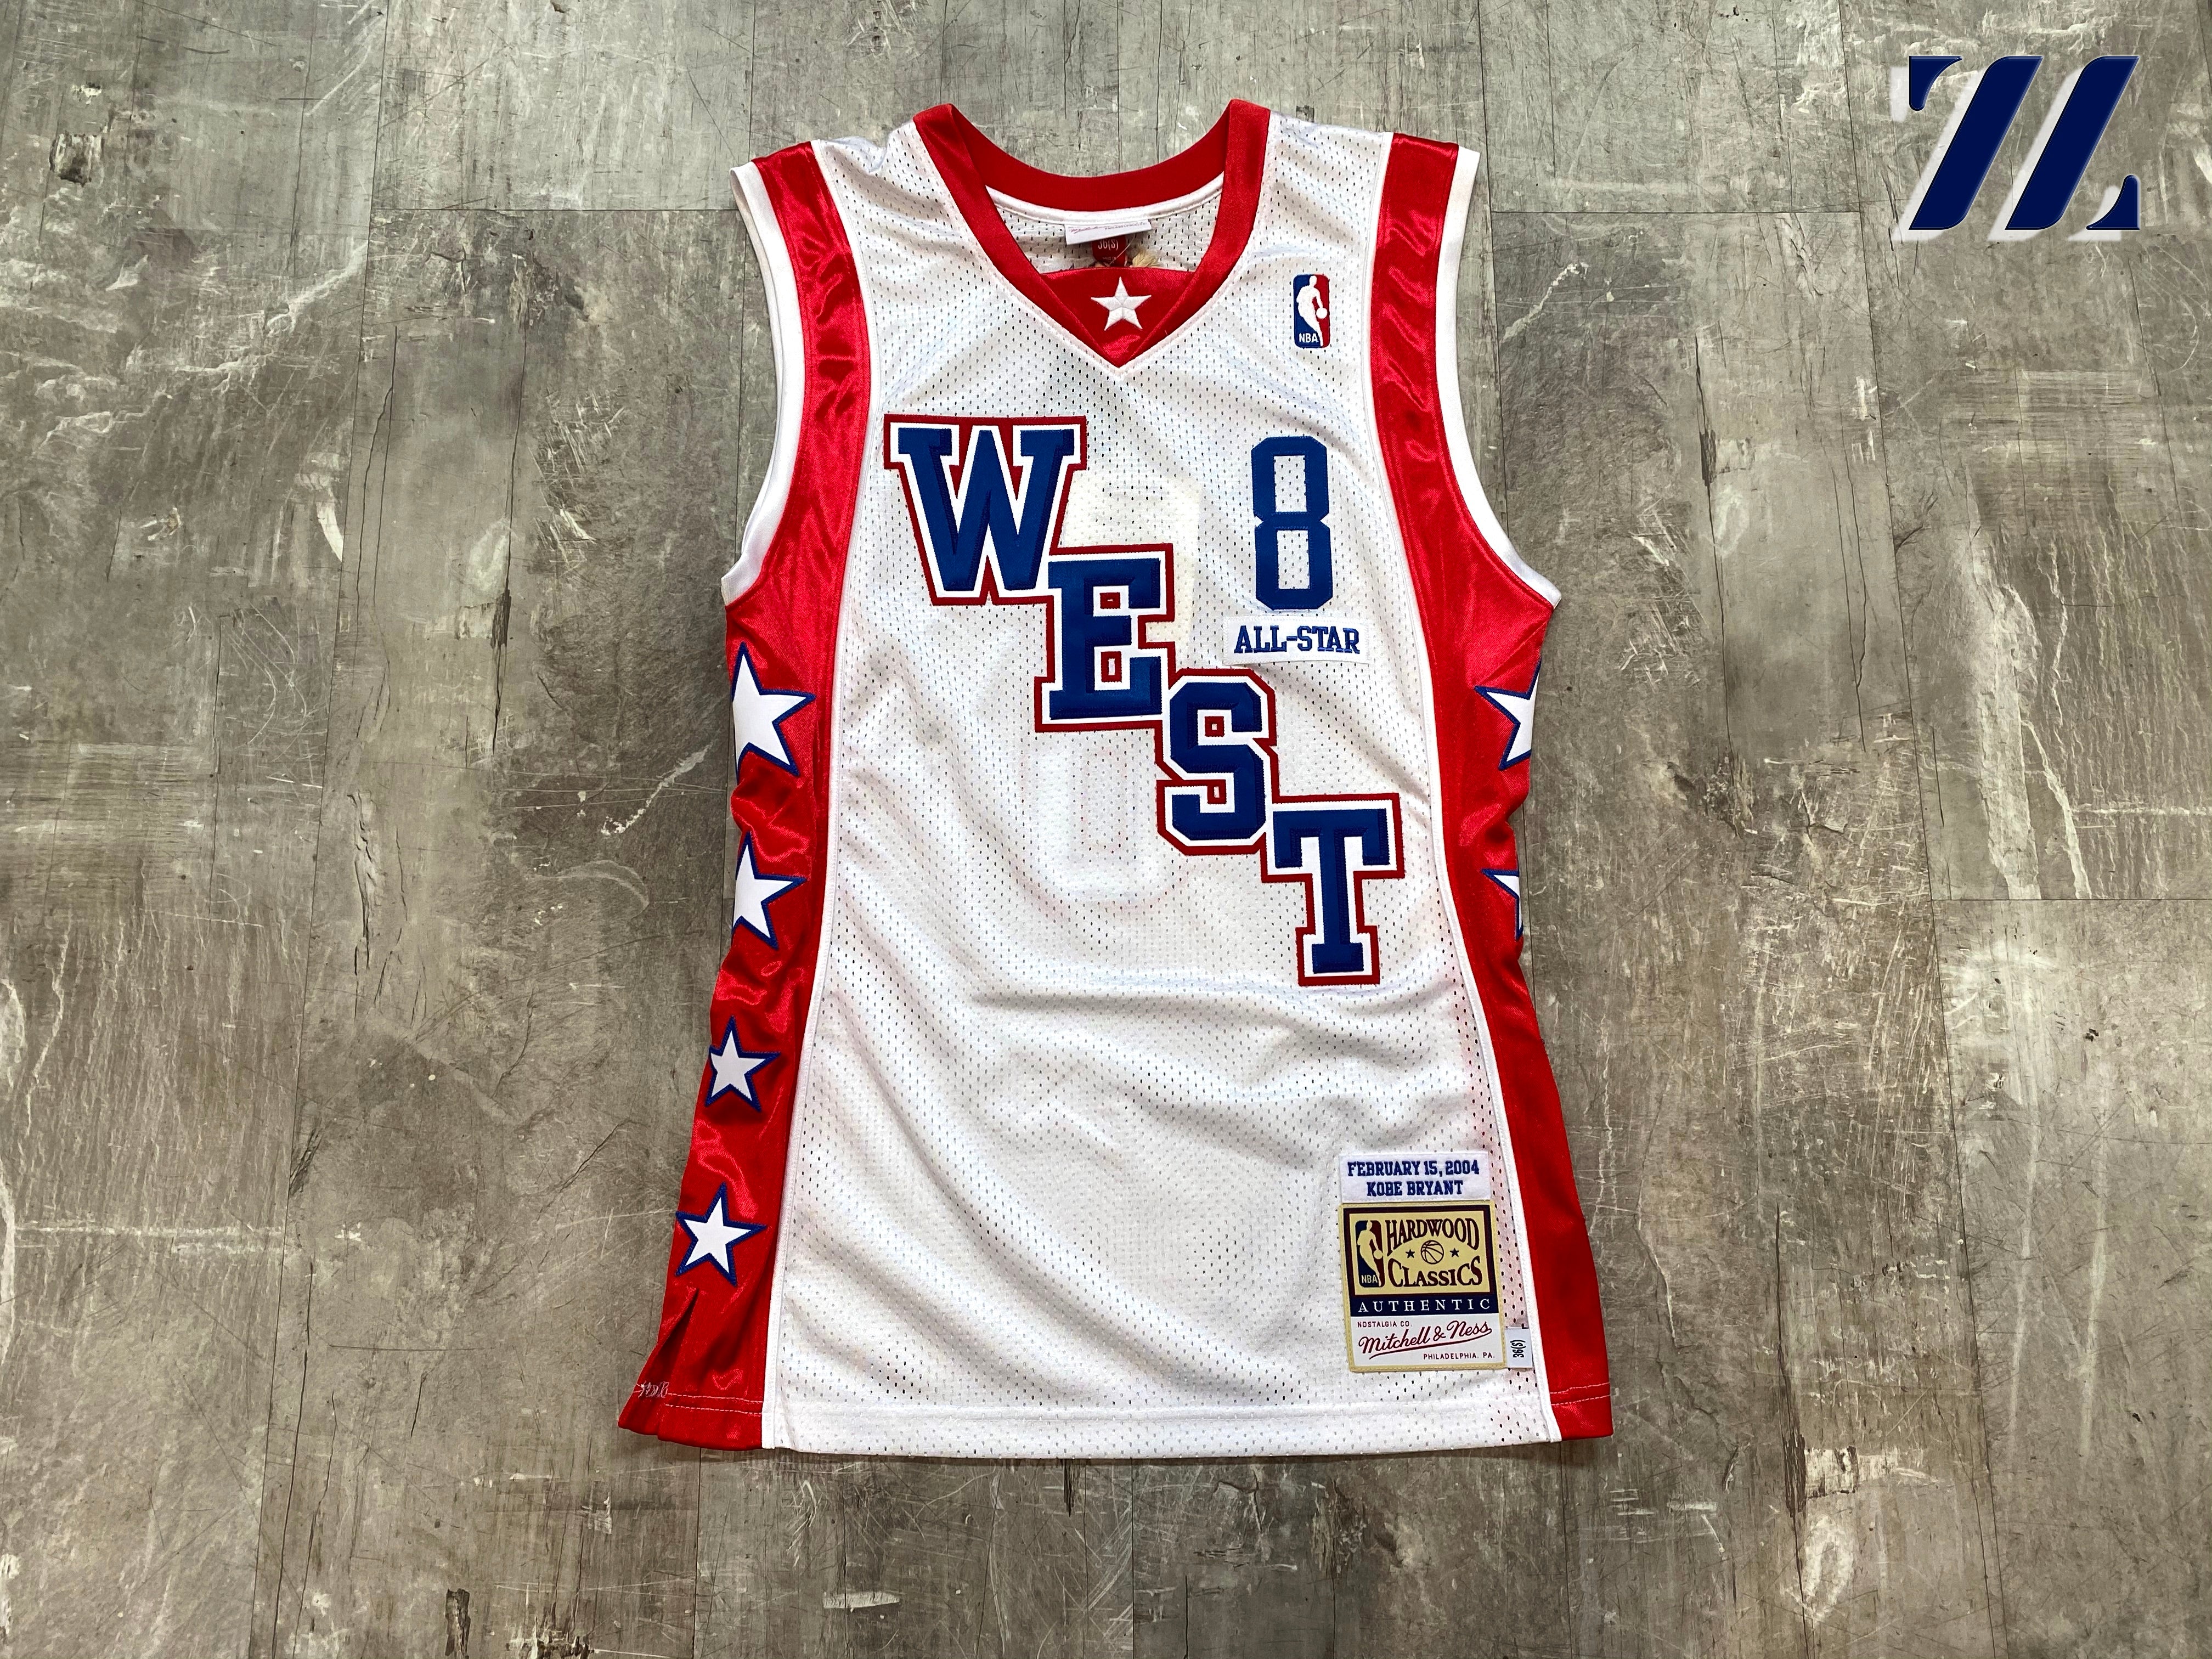 Men’s Mitchell & Ness Authentic All-Star West Jersey XL